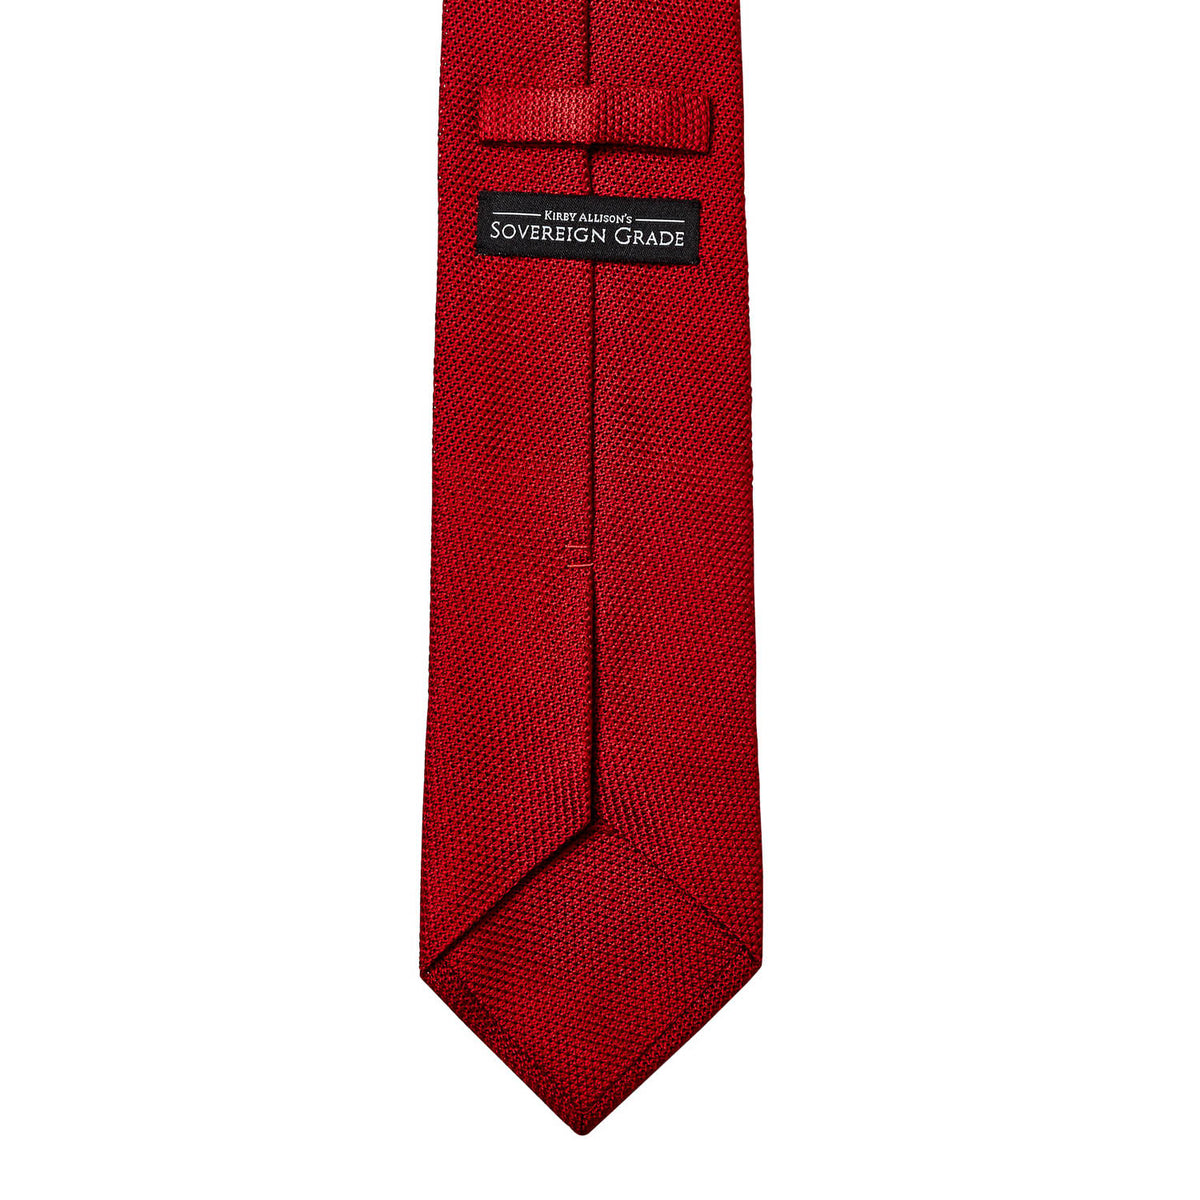 A Sovereign Grade Grenadine Fina Red Tie by KirbyAllison.com on a white background.